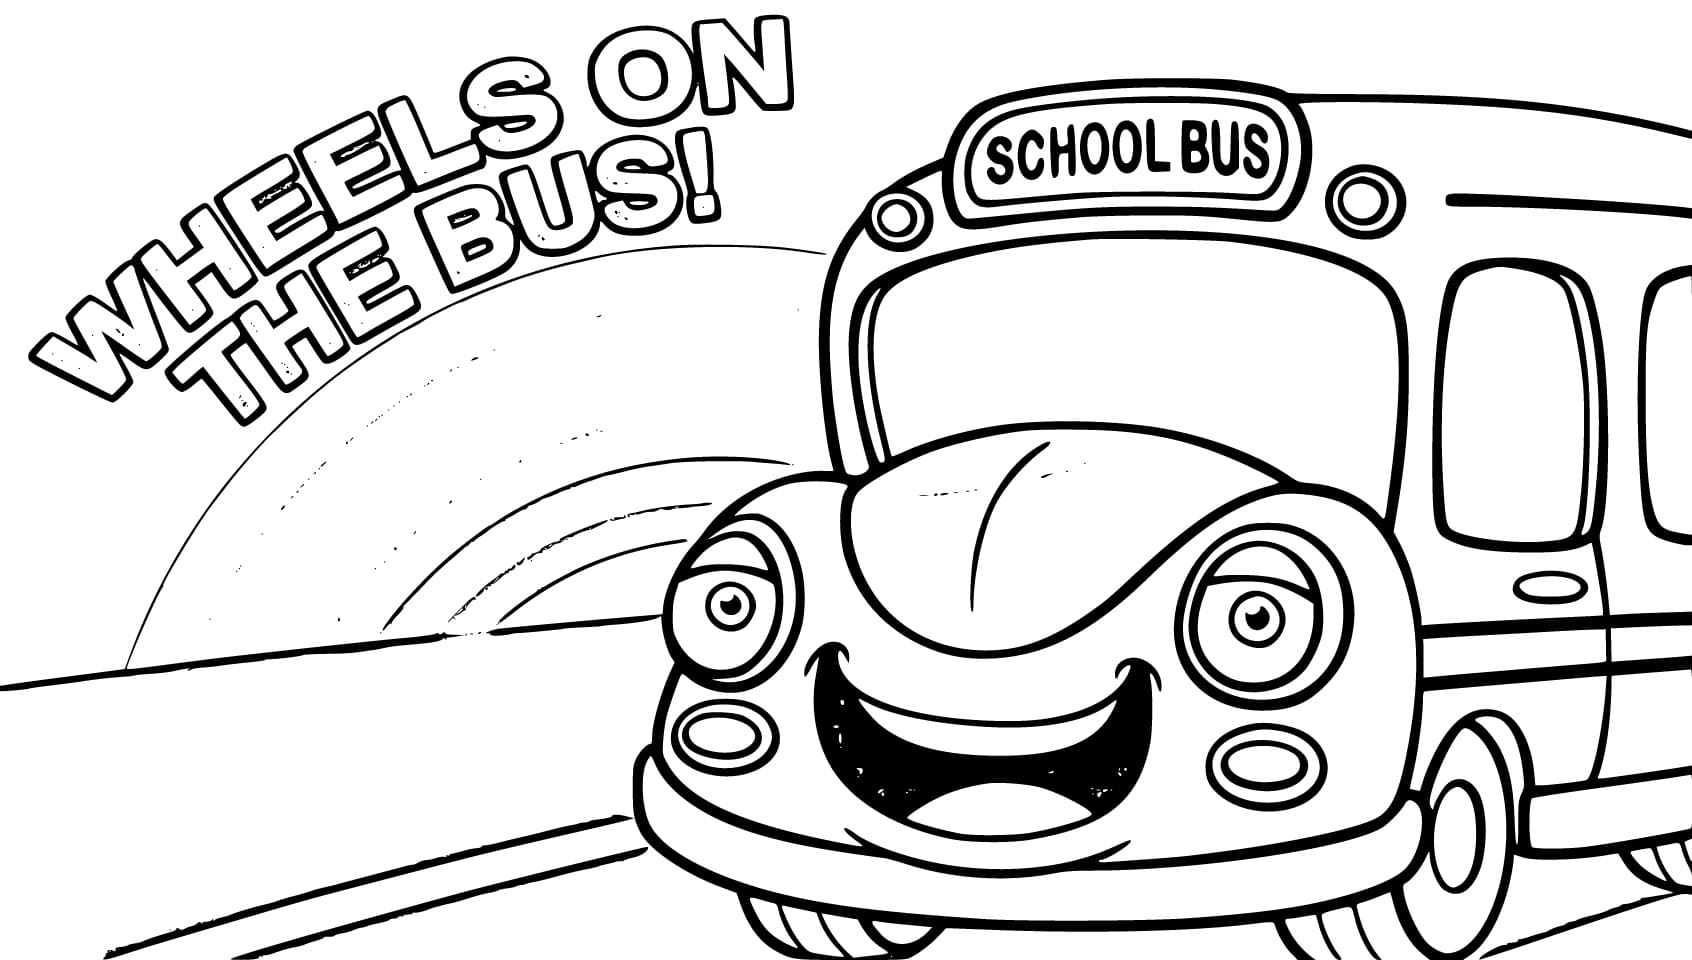 Print the wheel on the bus coloring page